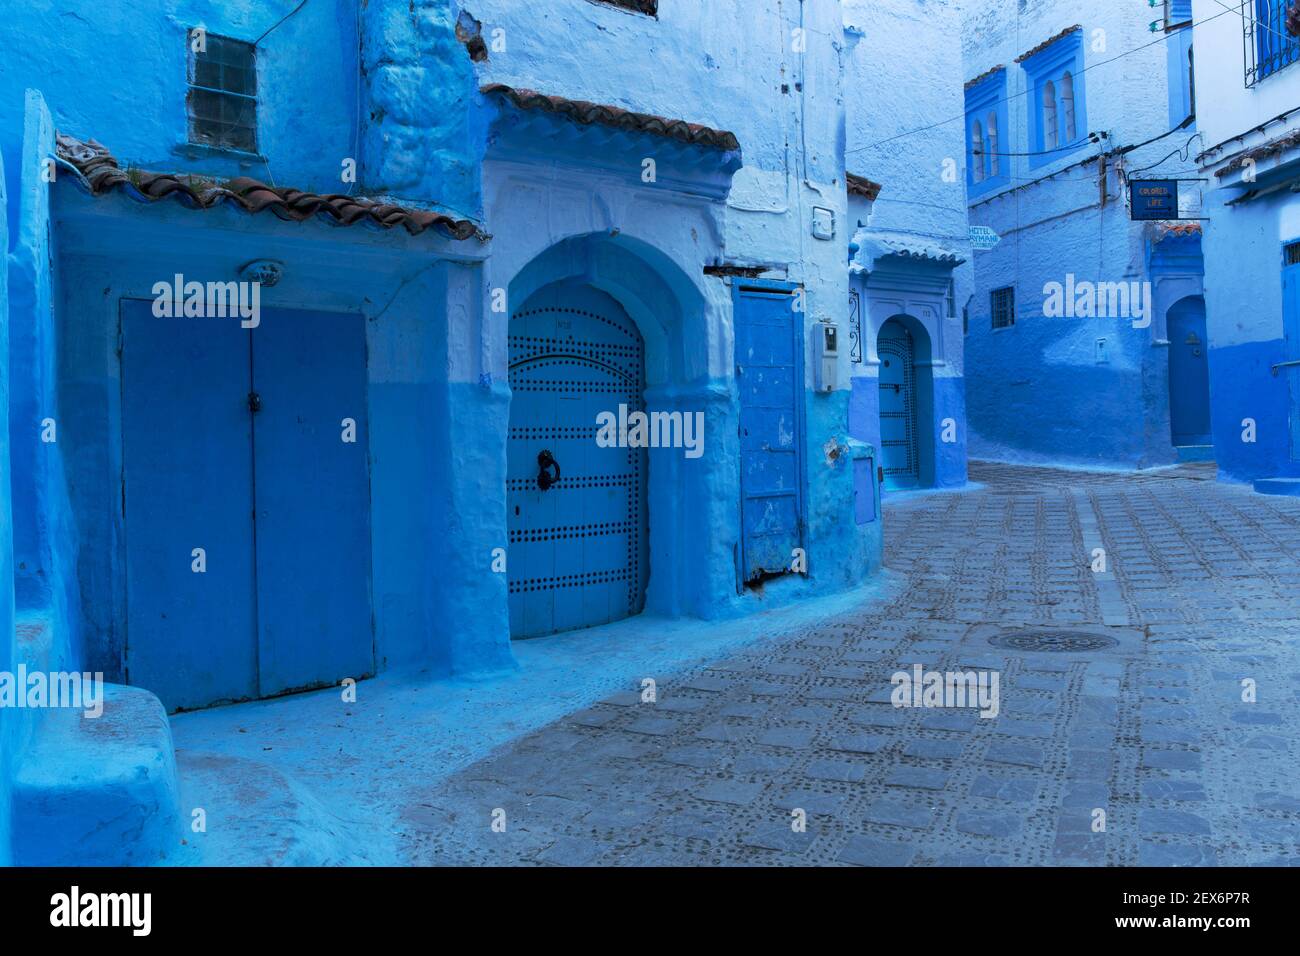 Morocco,Chefchaouen, architecture of white and indigo limewashed buildings Stock Photo